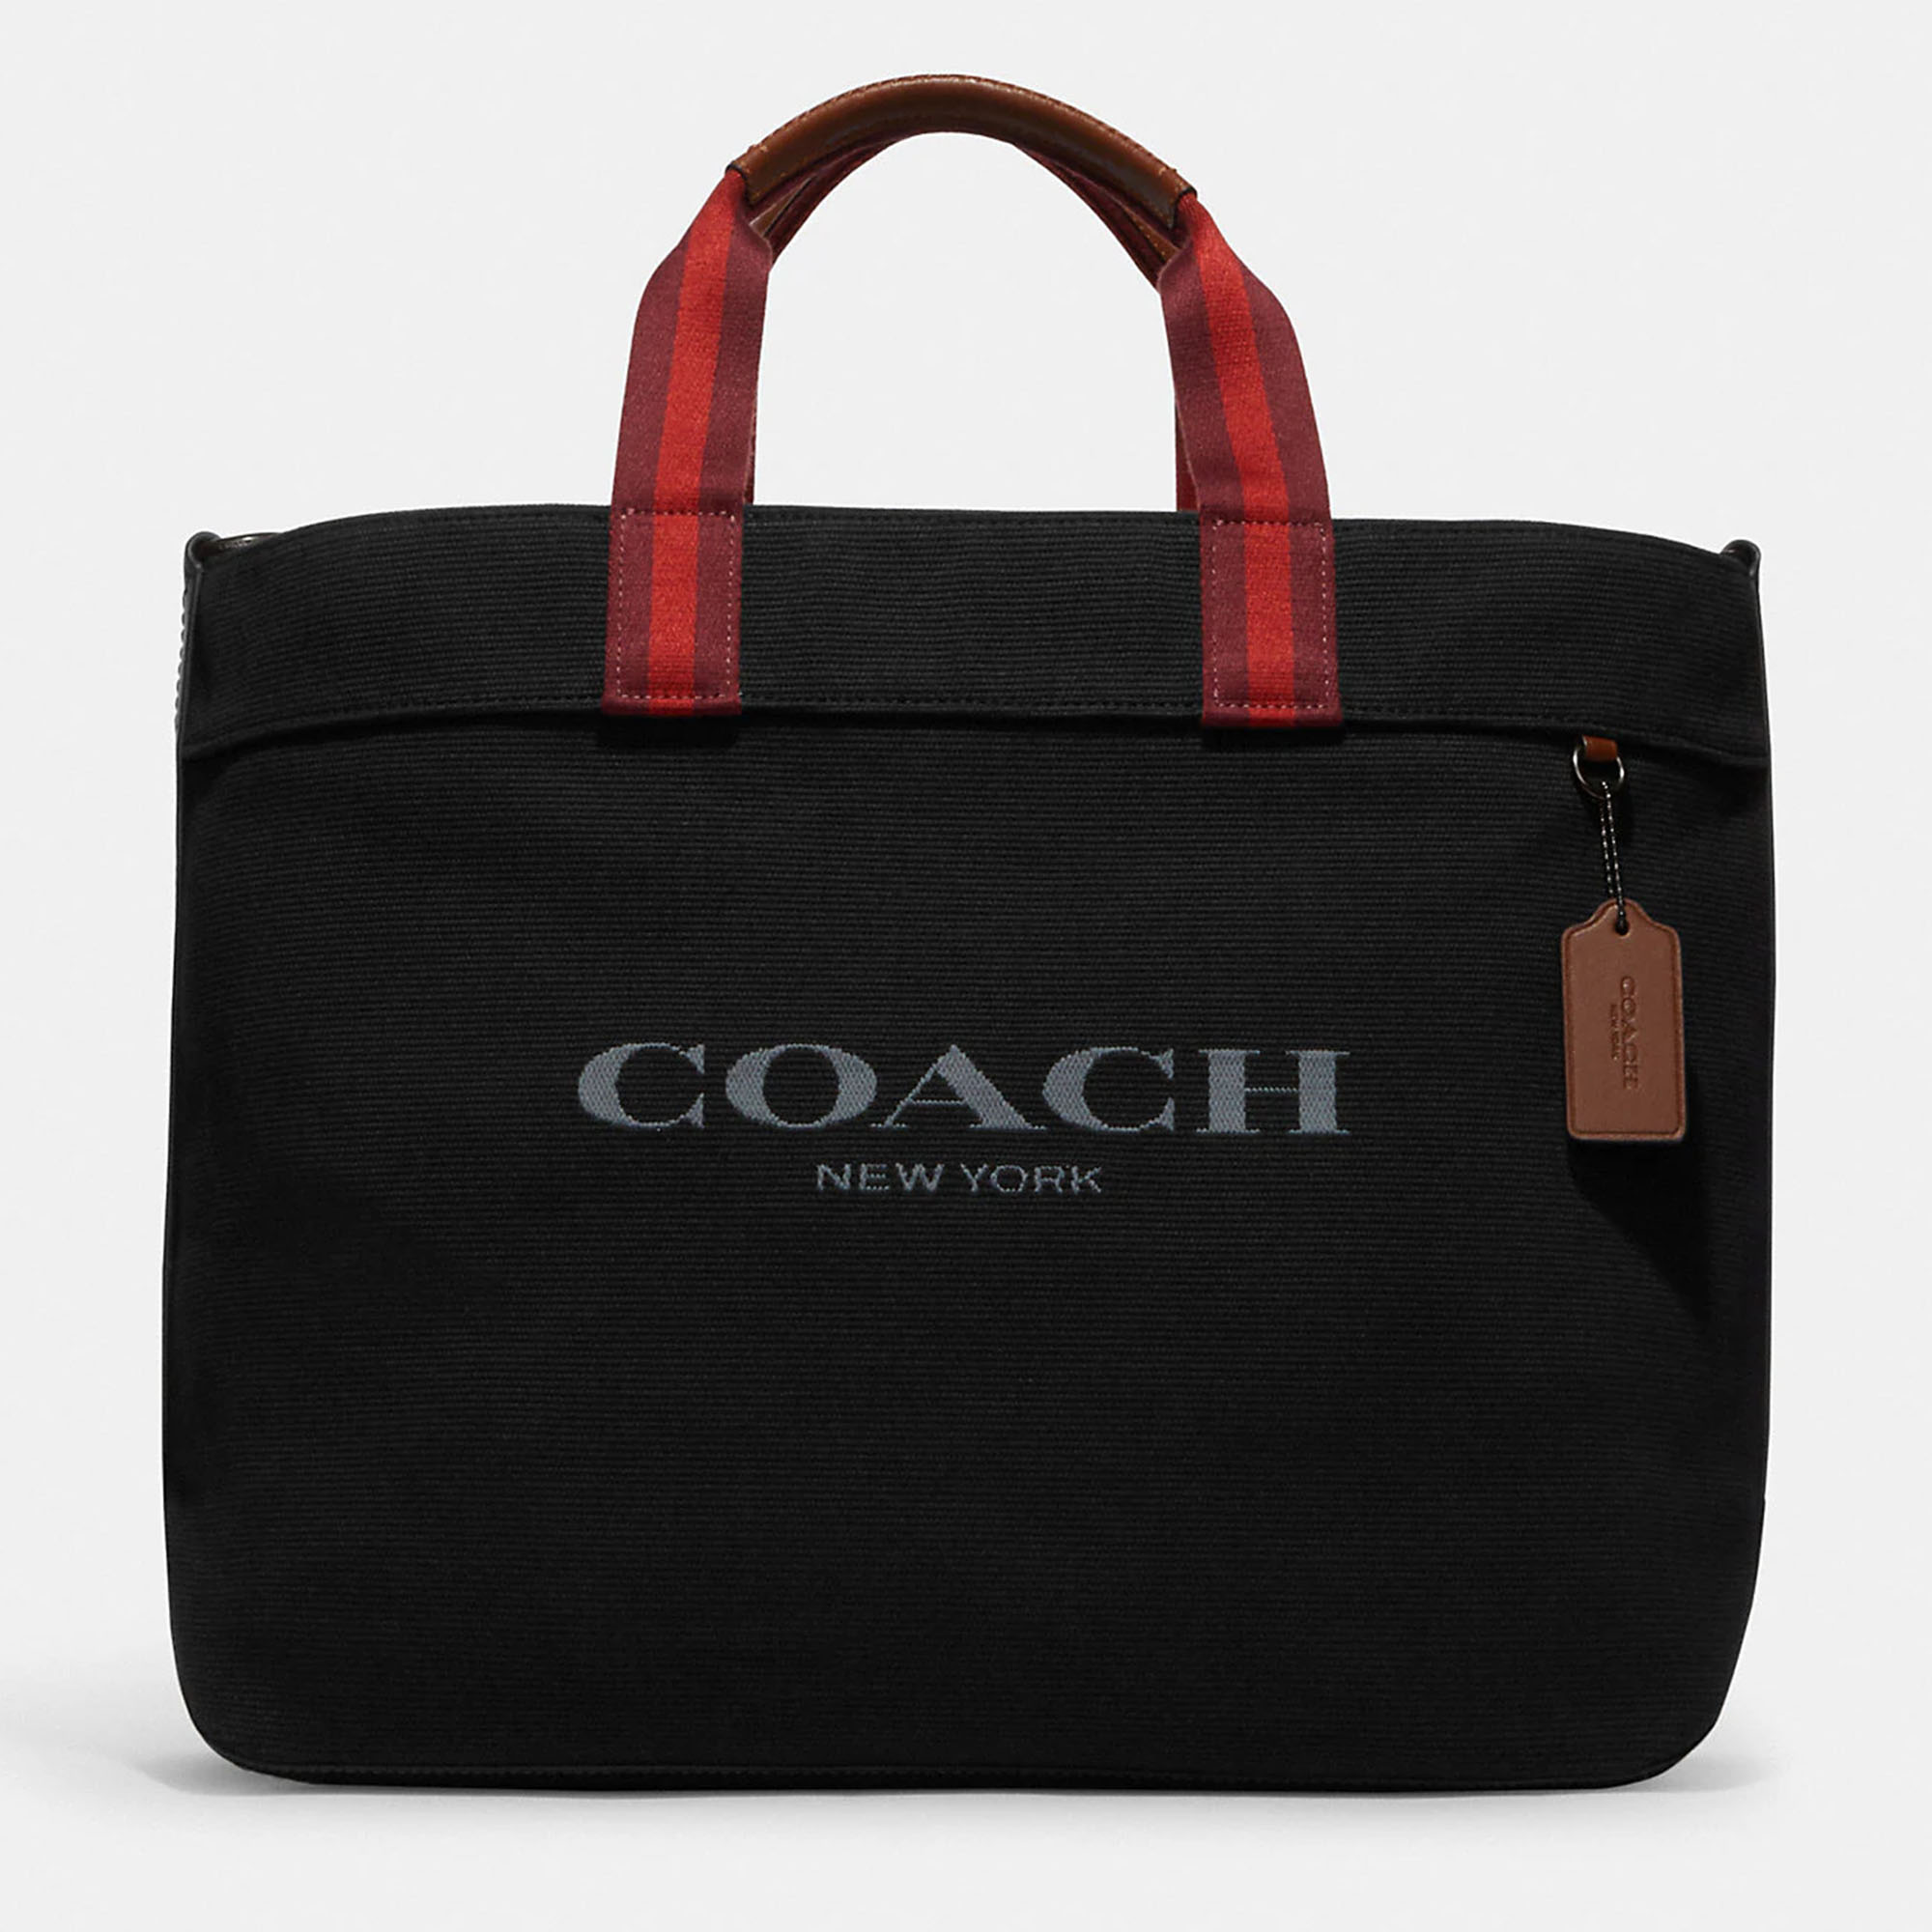 Coach Black Canvas And Leather Tote 38 Bag